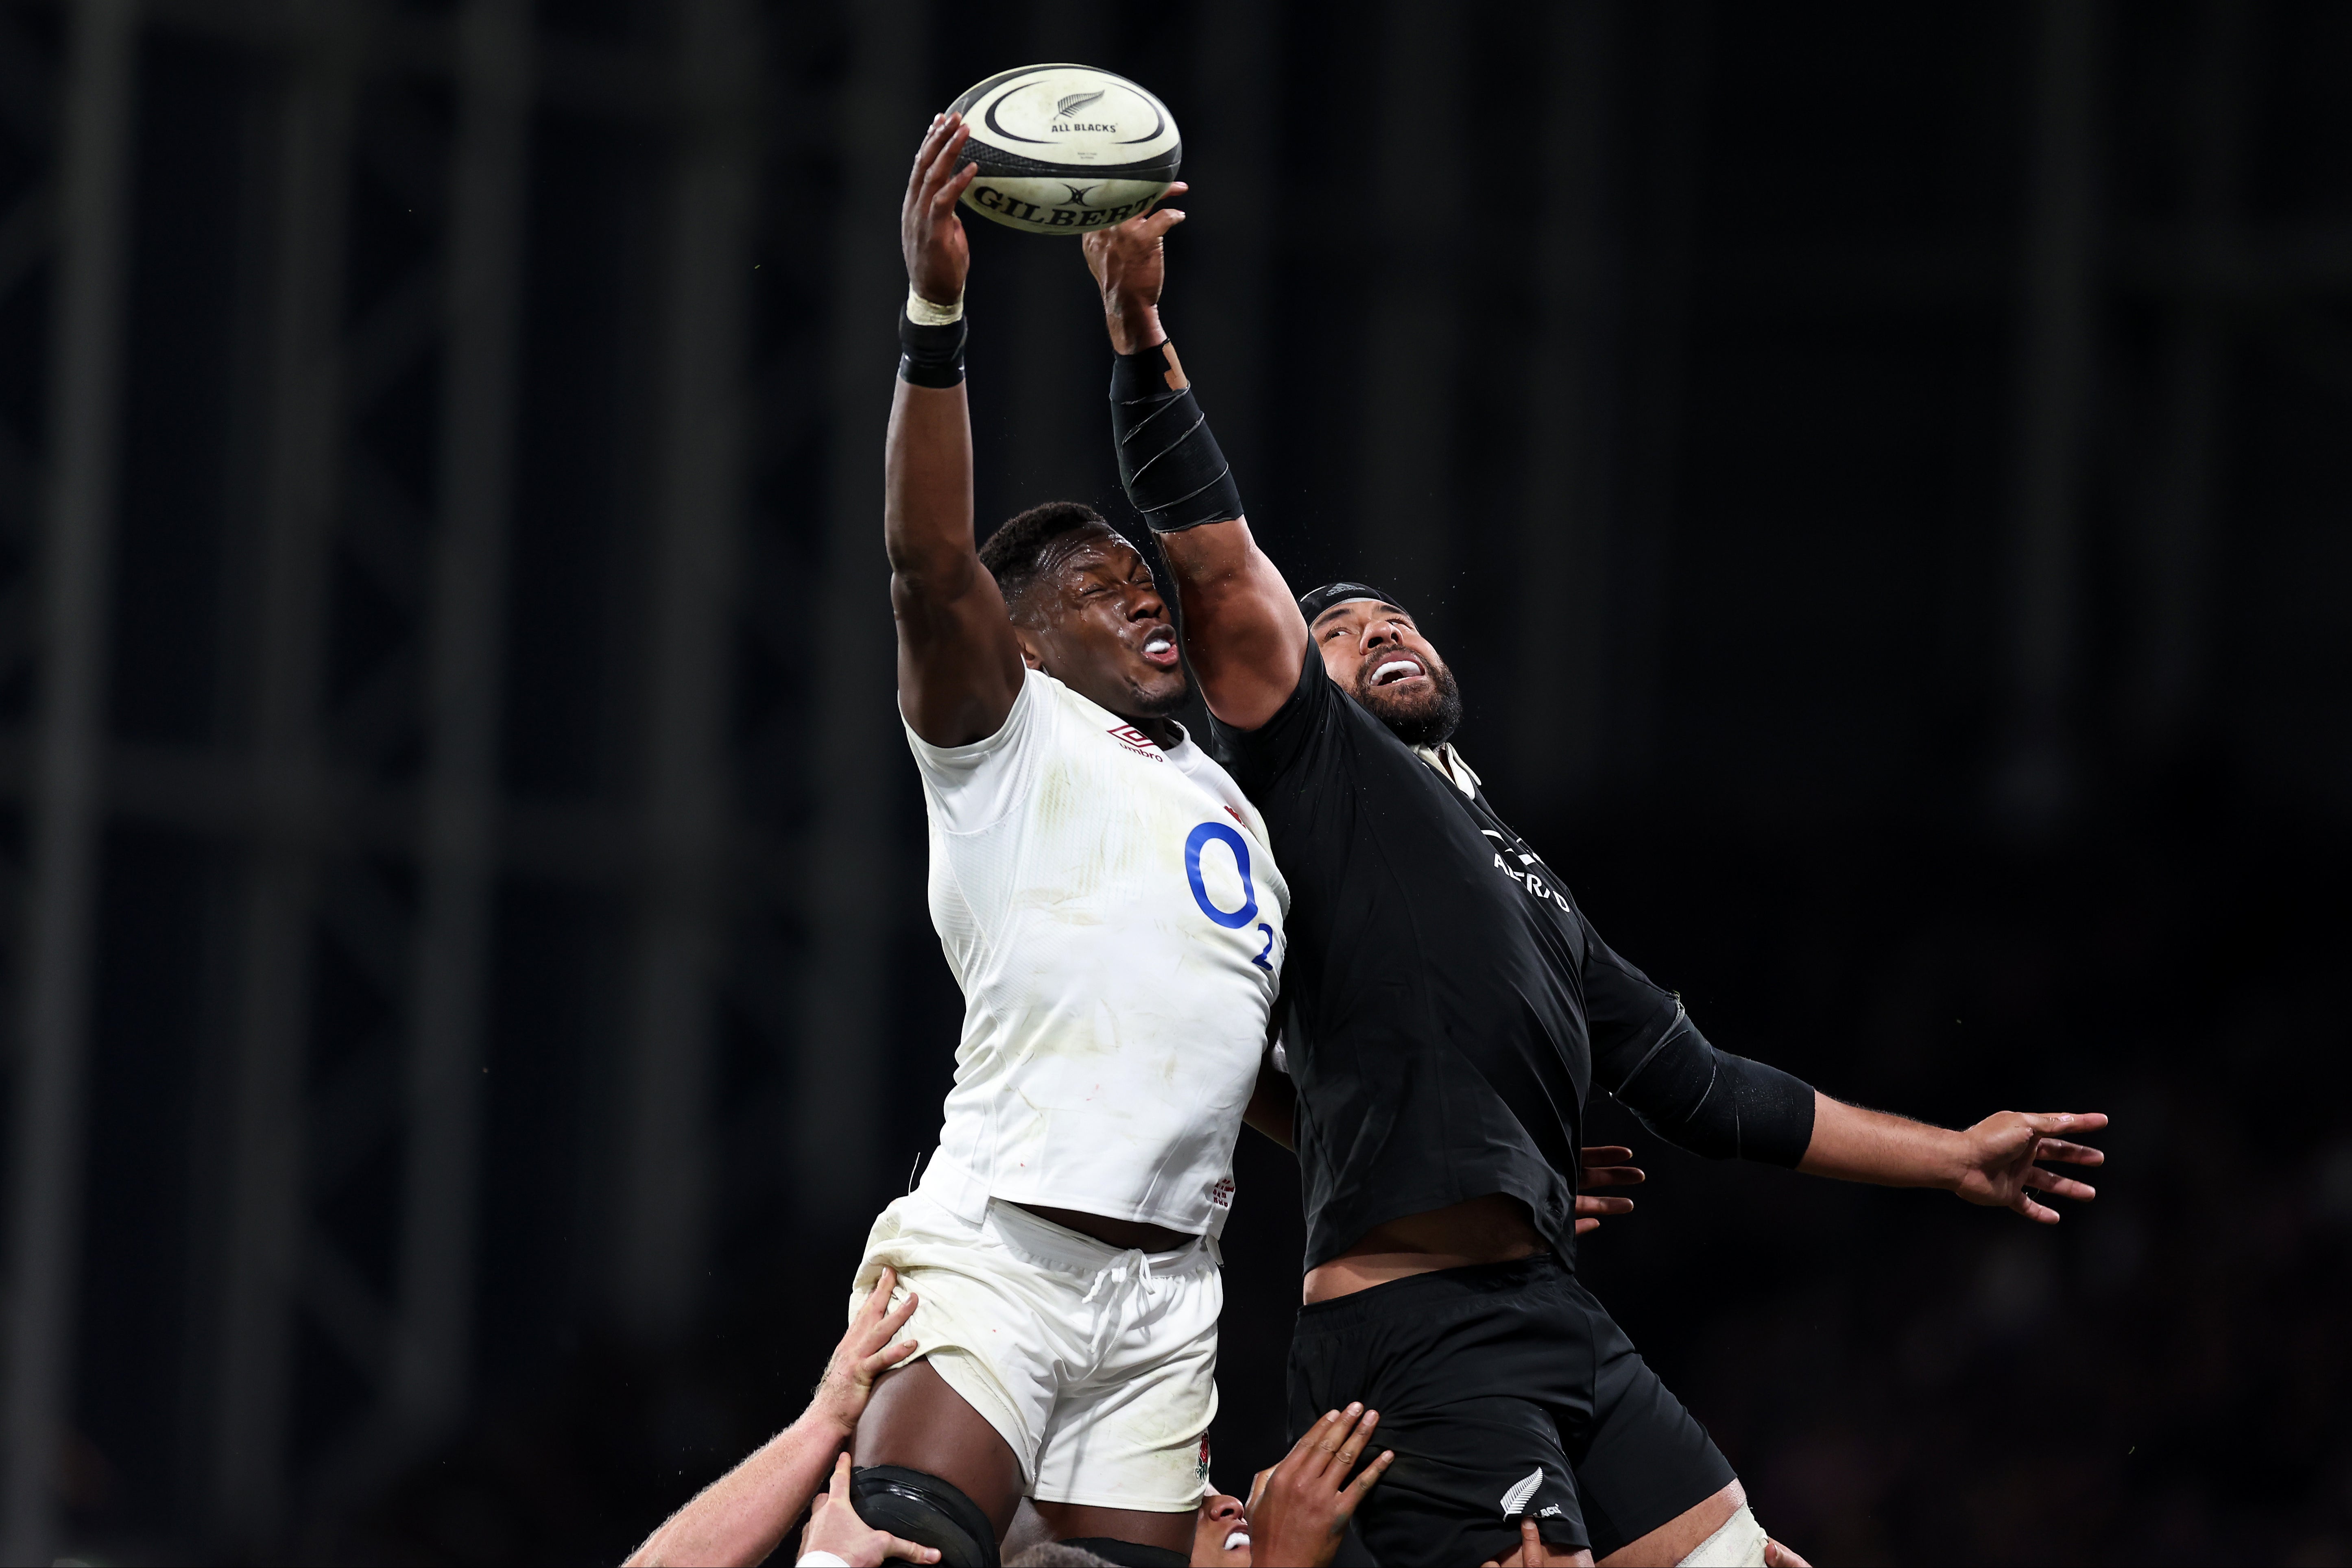 Maro Itoje was outstanding for England